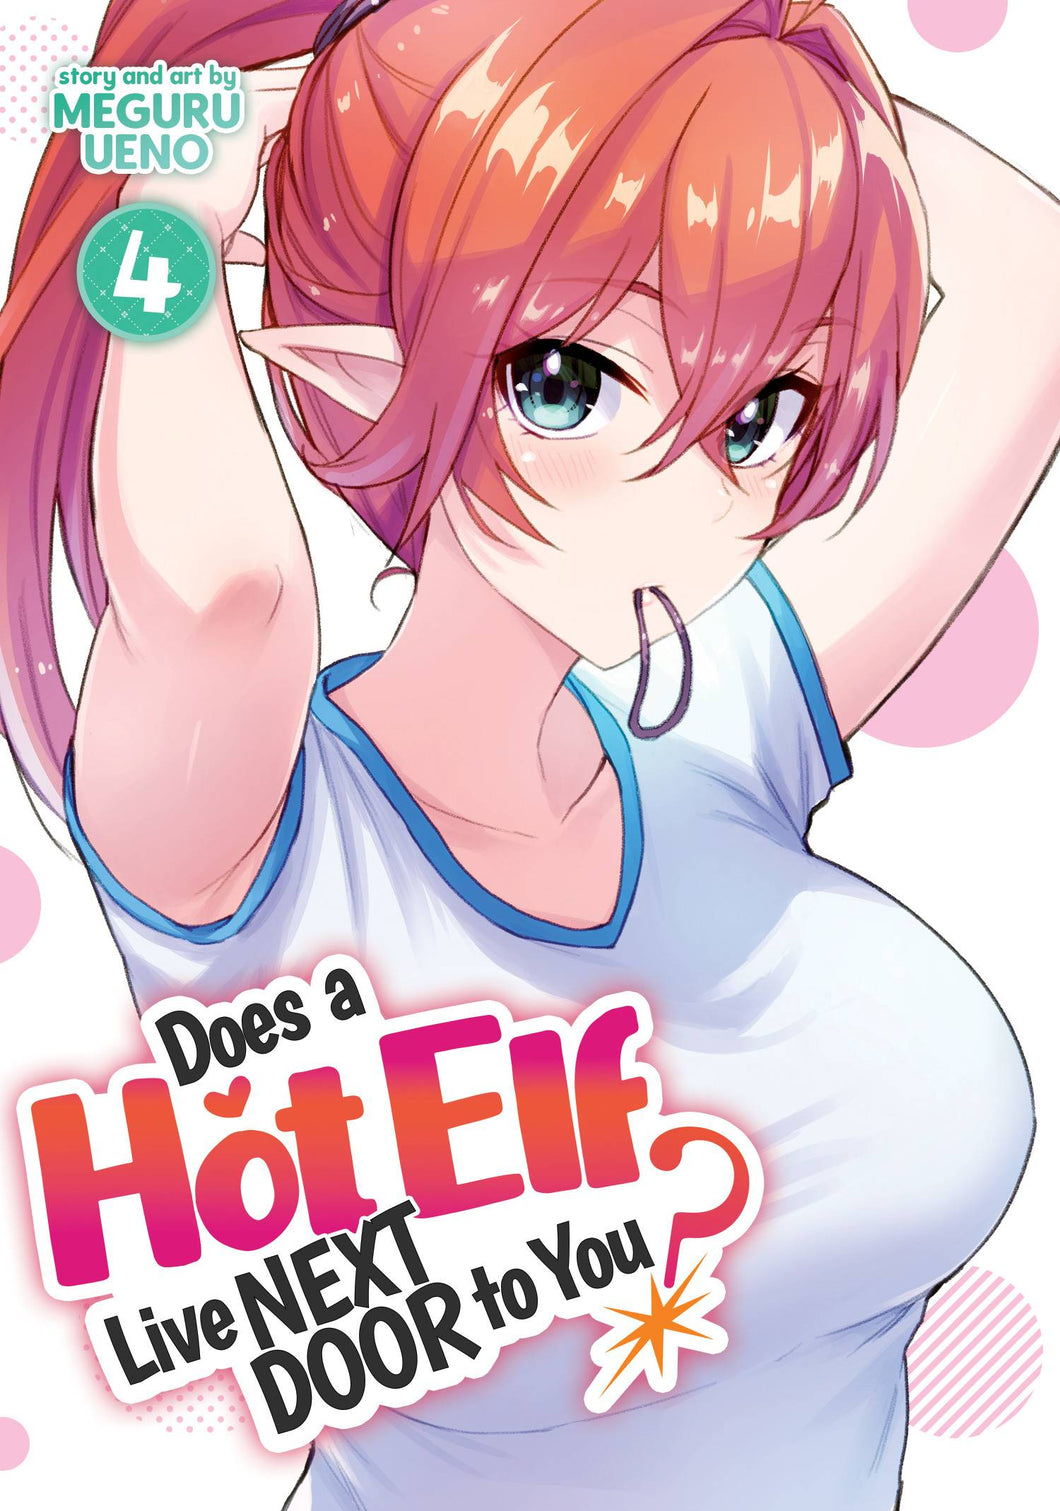 Does Hot Elf Live Next Door to You GN Vol 04 - Books